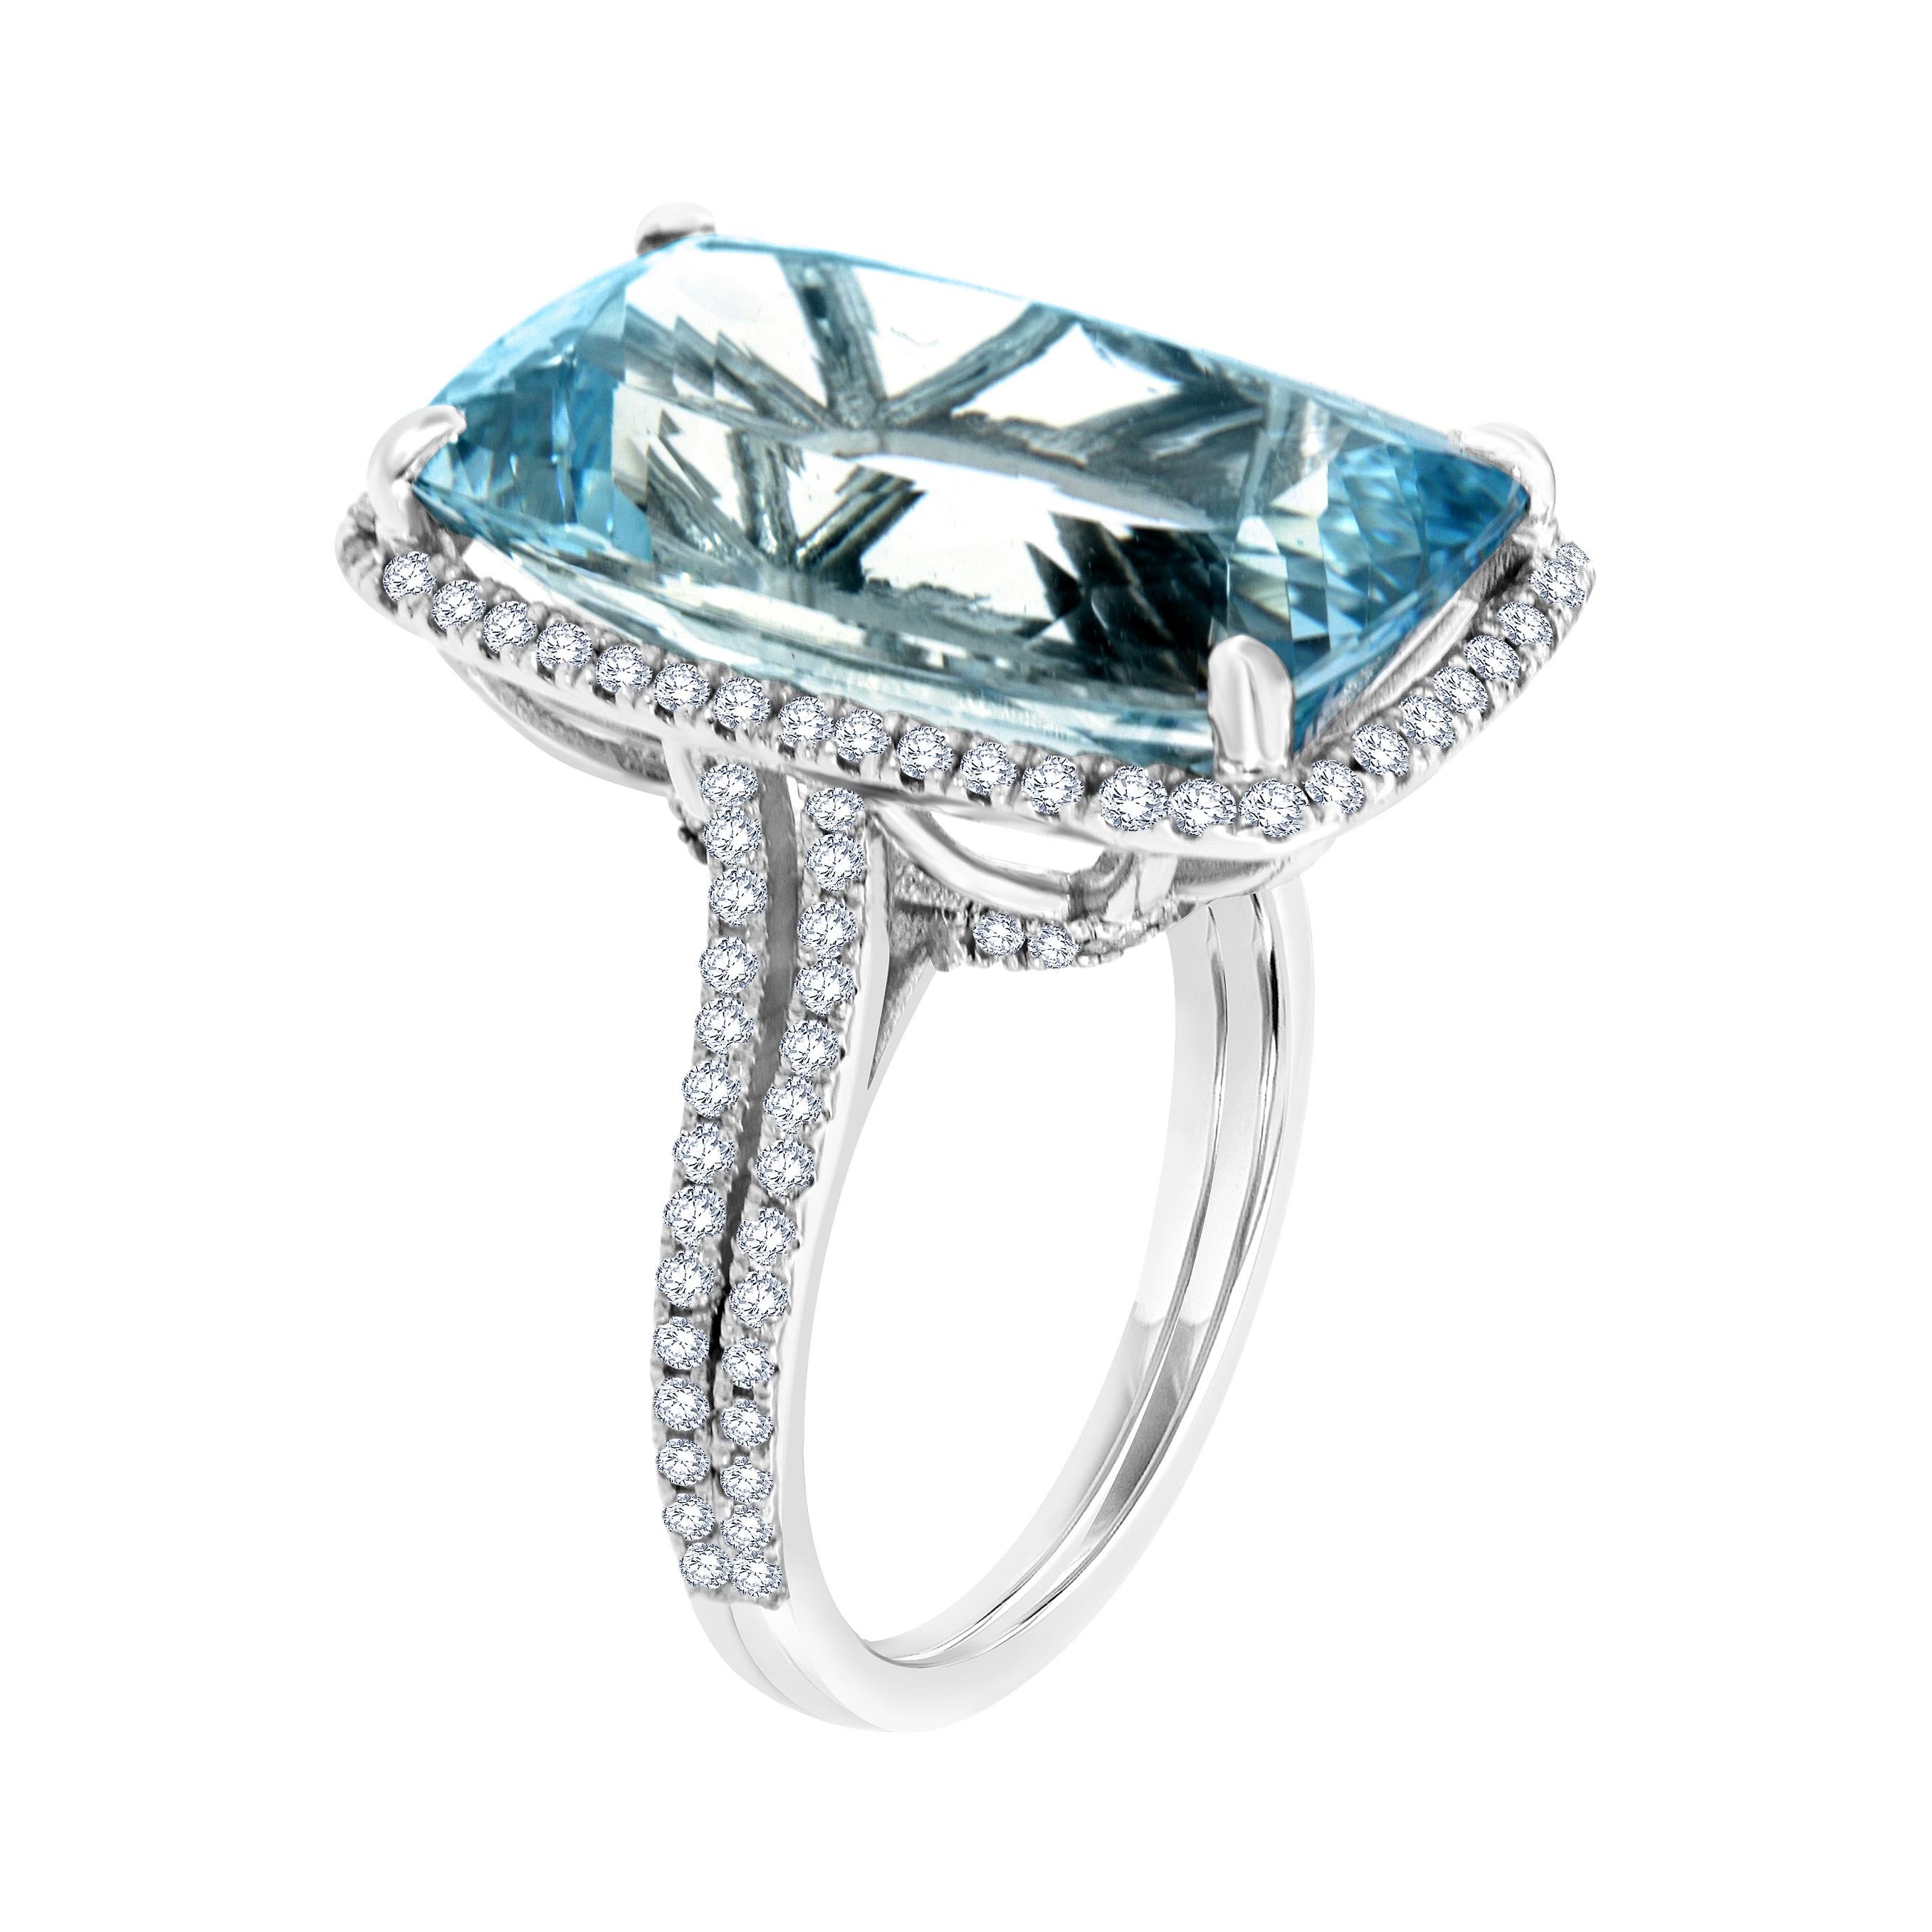 This one-of-a-kind ring features a rare Sky-Blue 13.72-carat cushion brilliant shape Aquamarine encircled by a halo of round brilliant diamond on a split shank. The delicate hidden halo underneath its crown adds to the glamour of this stunning ring.